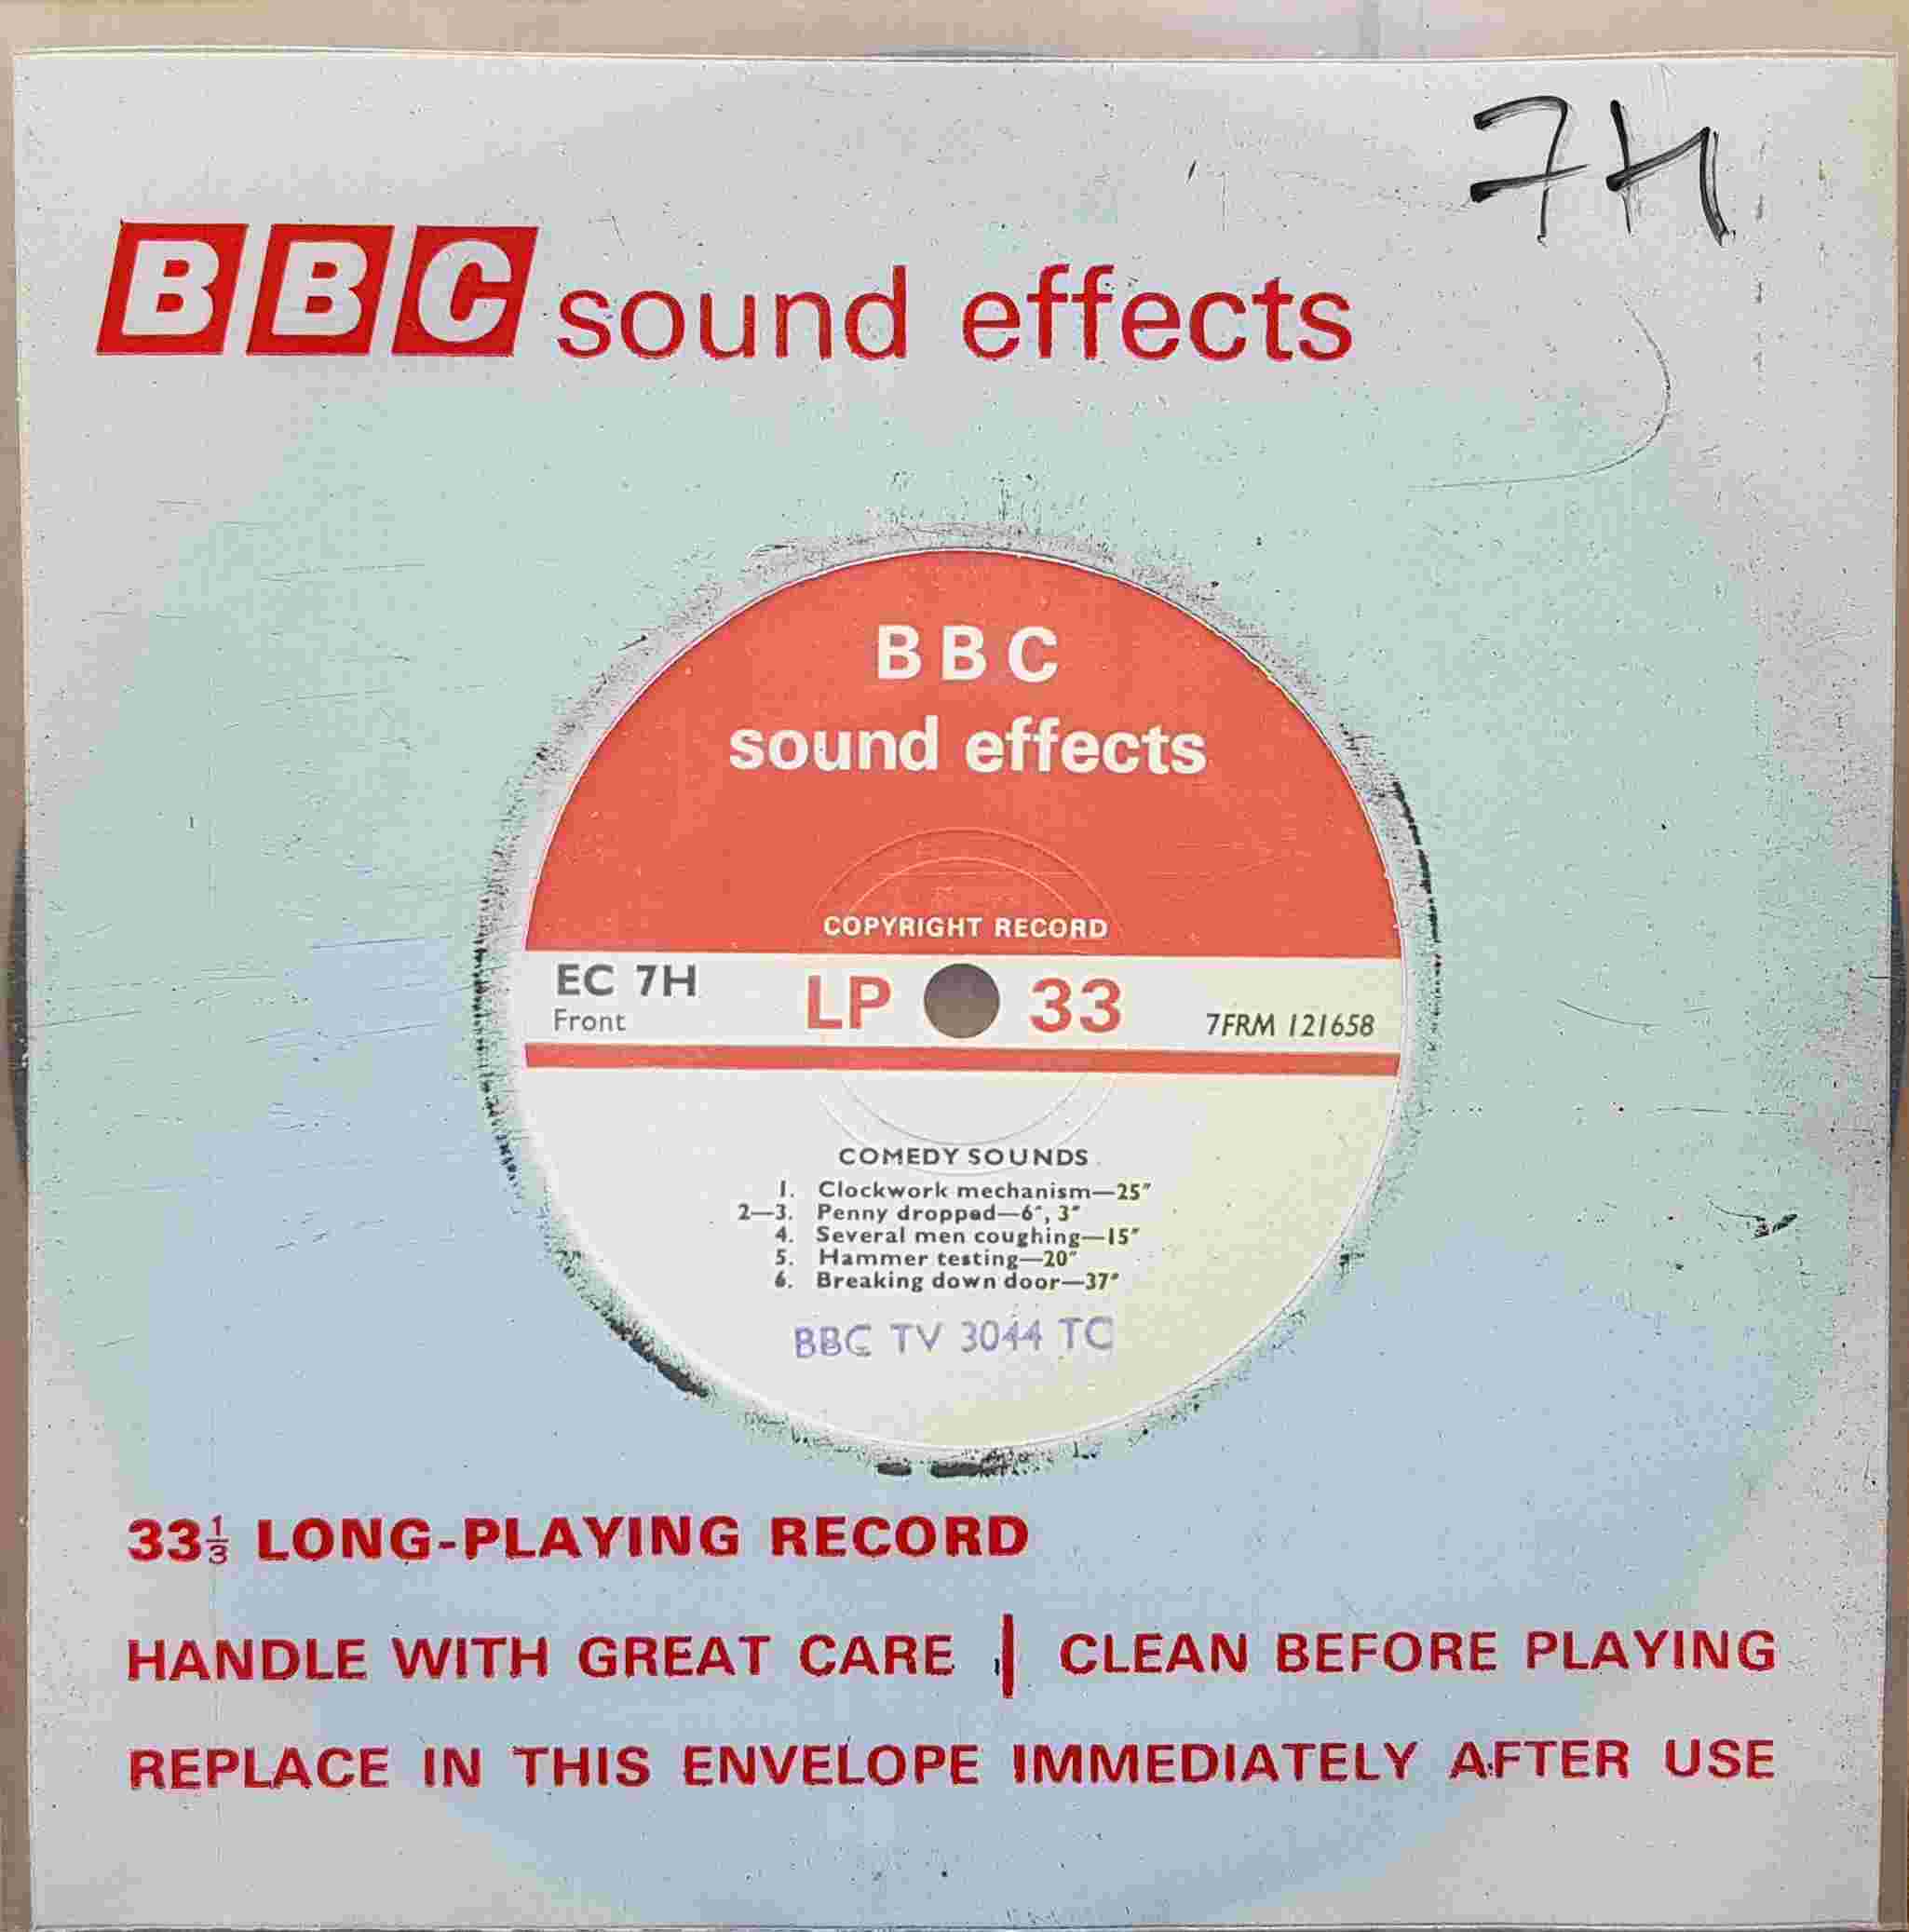 Picture of EC 7H Comedy sounds by artist Not registered from the BBC singles - Records and Tapes library